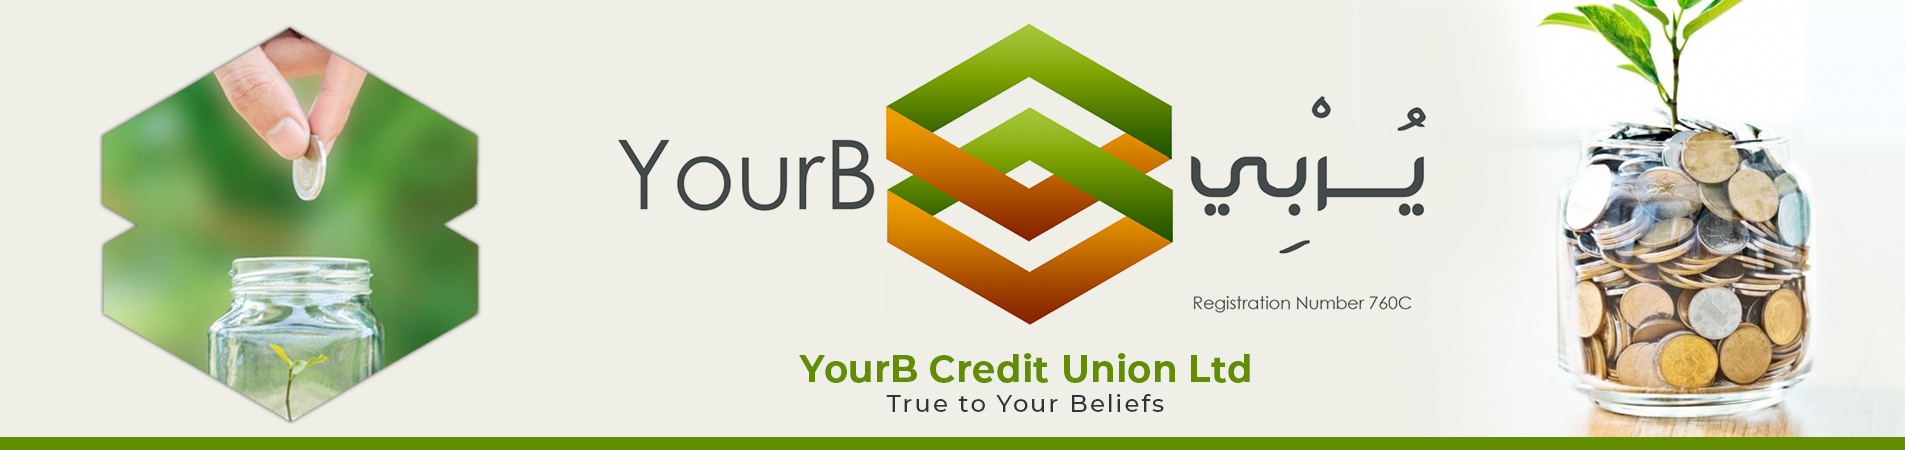 Friends of YourB Credit Union